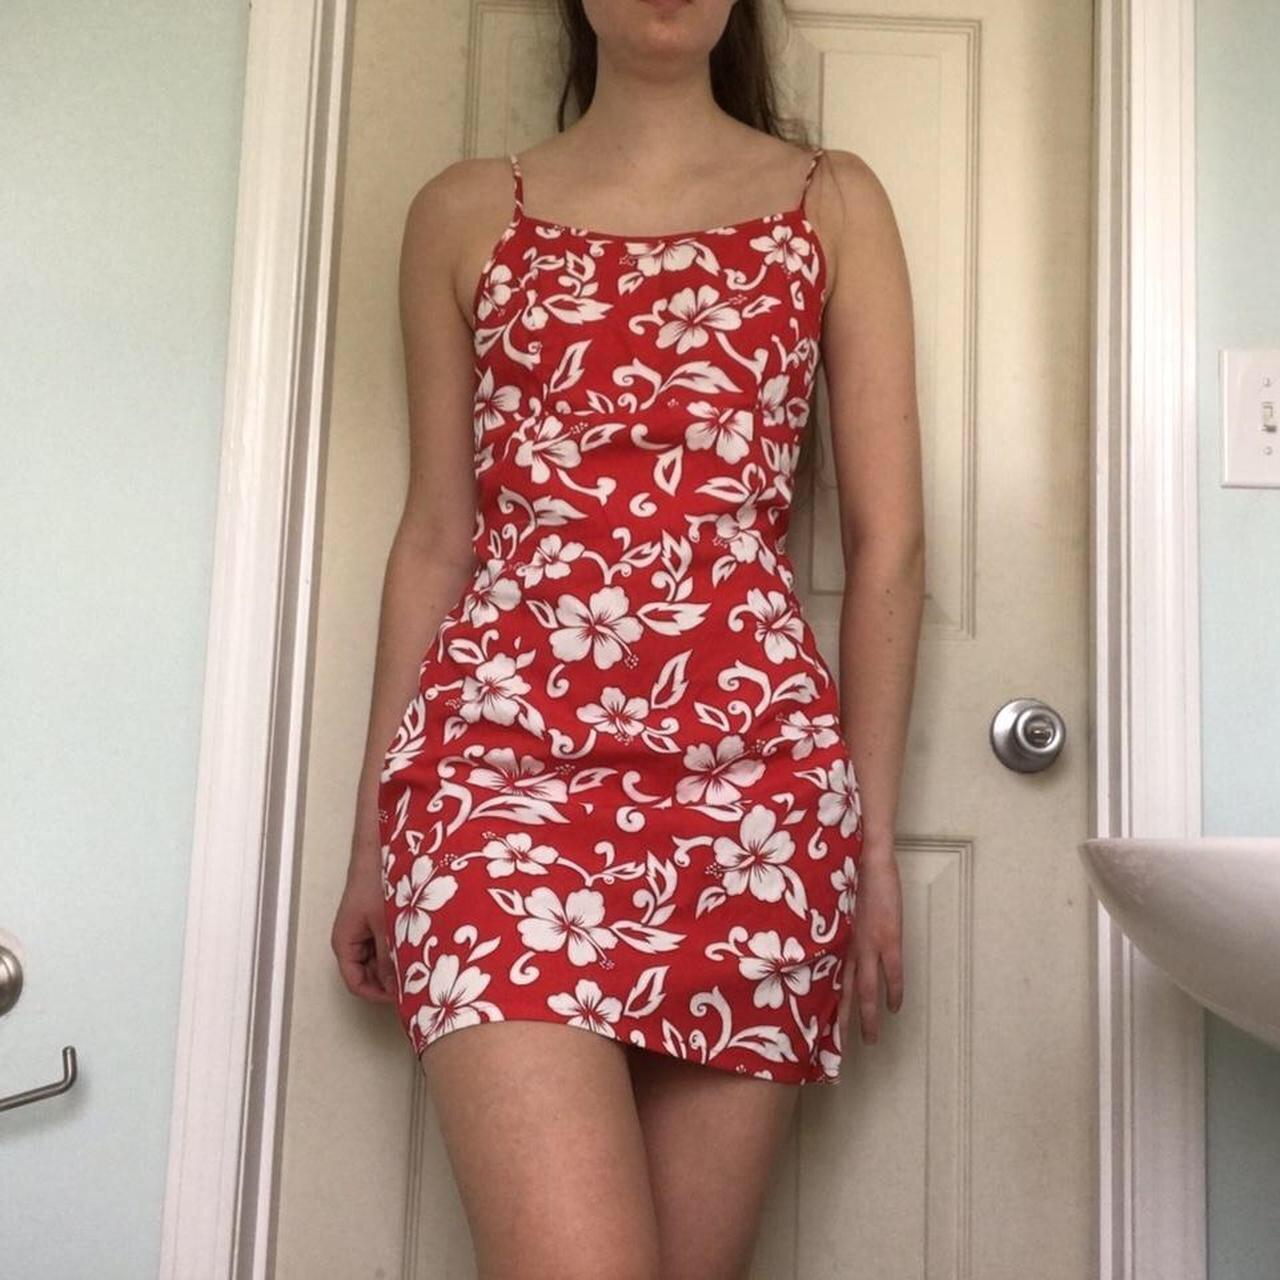 Women's Red and White Dress | Depop